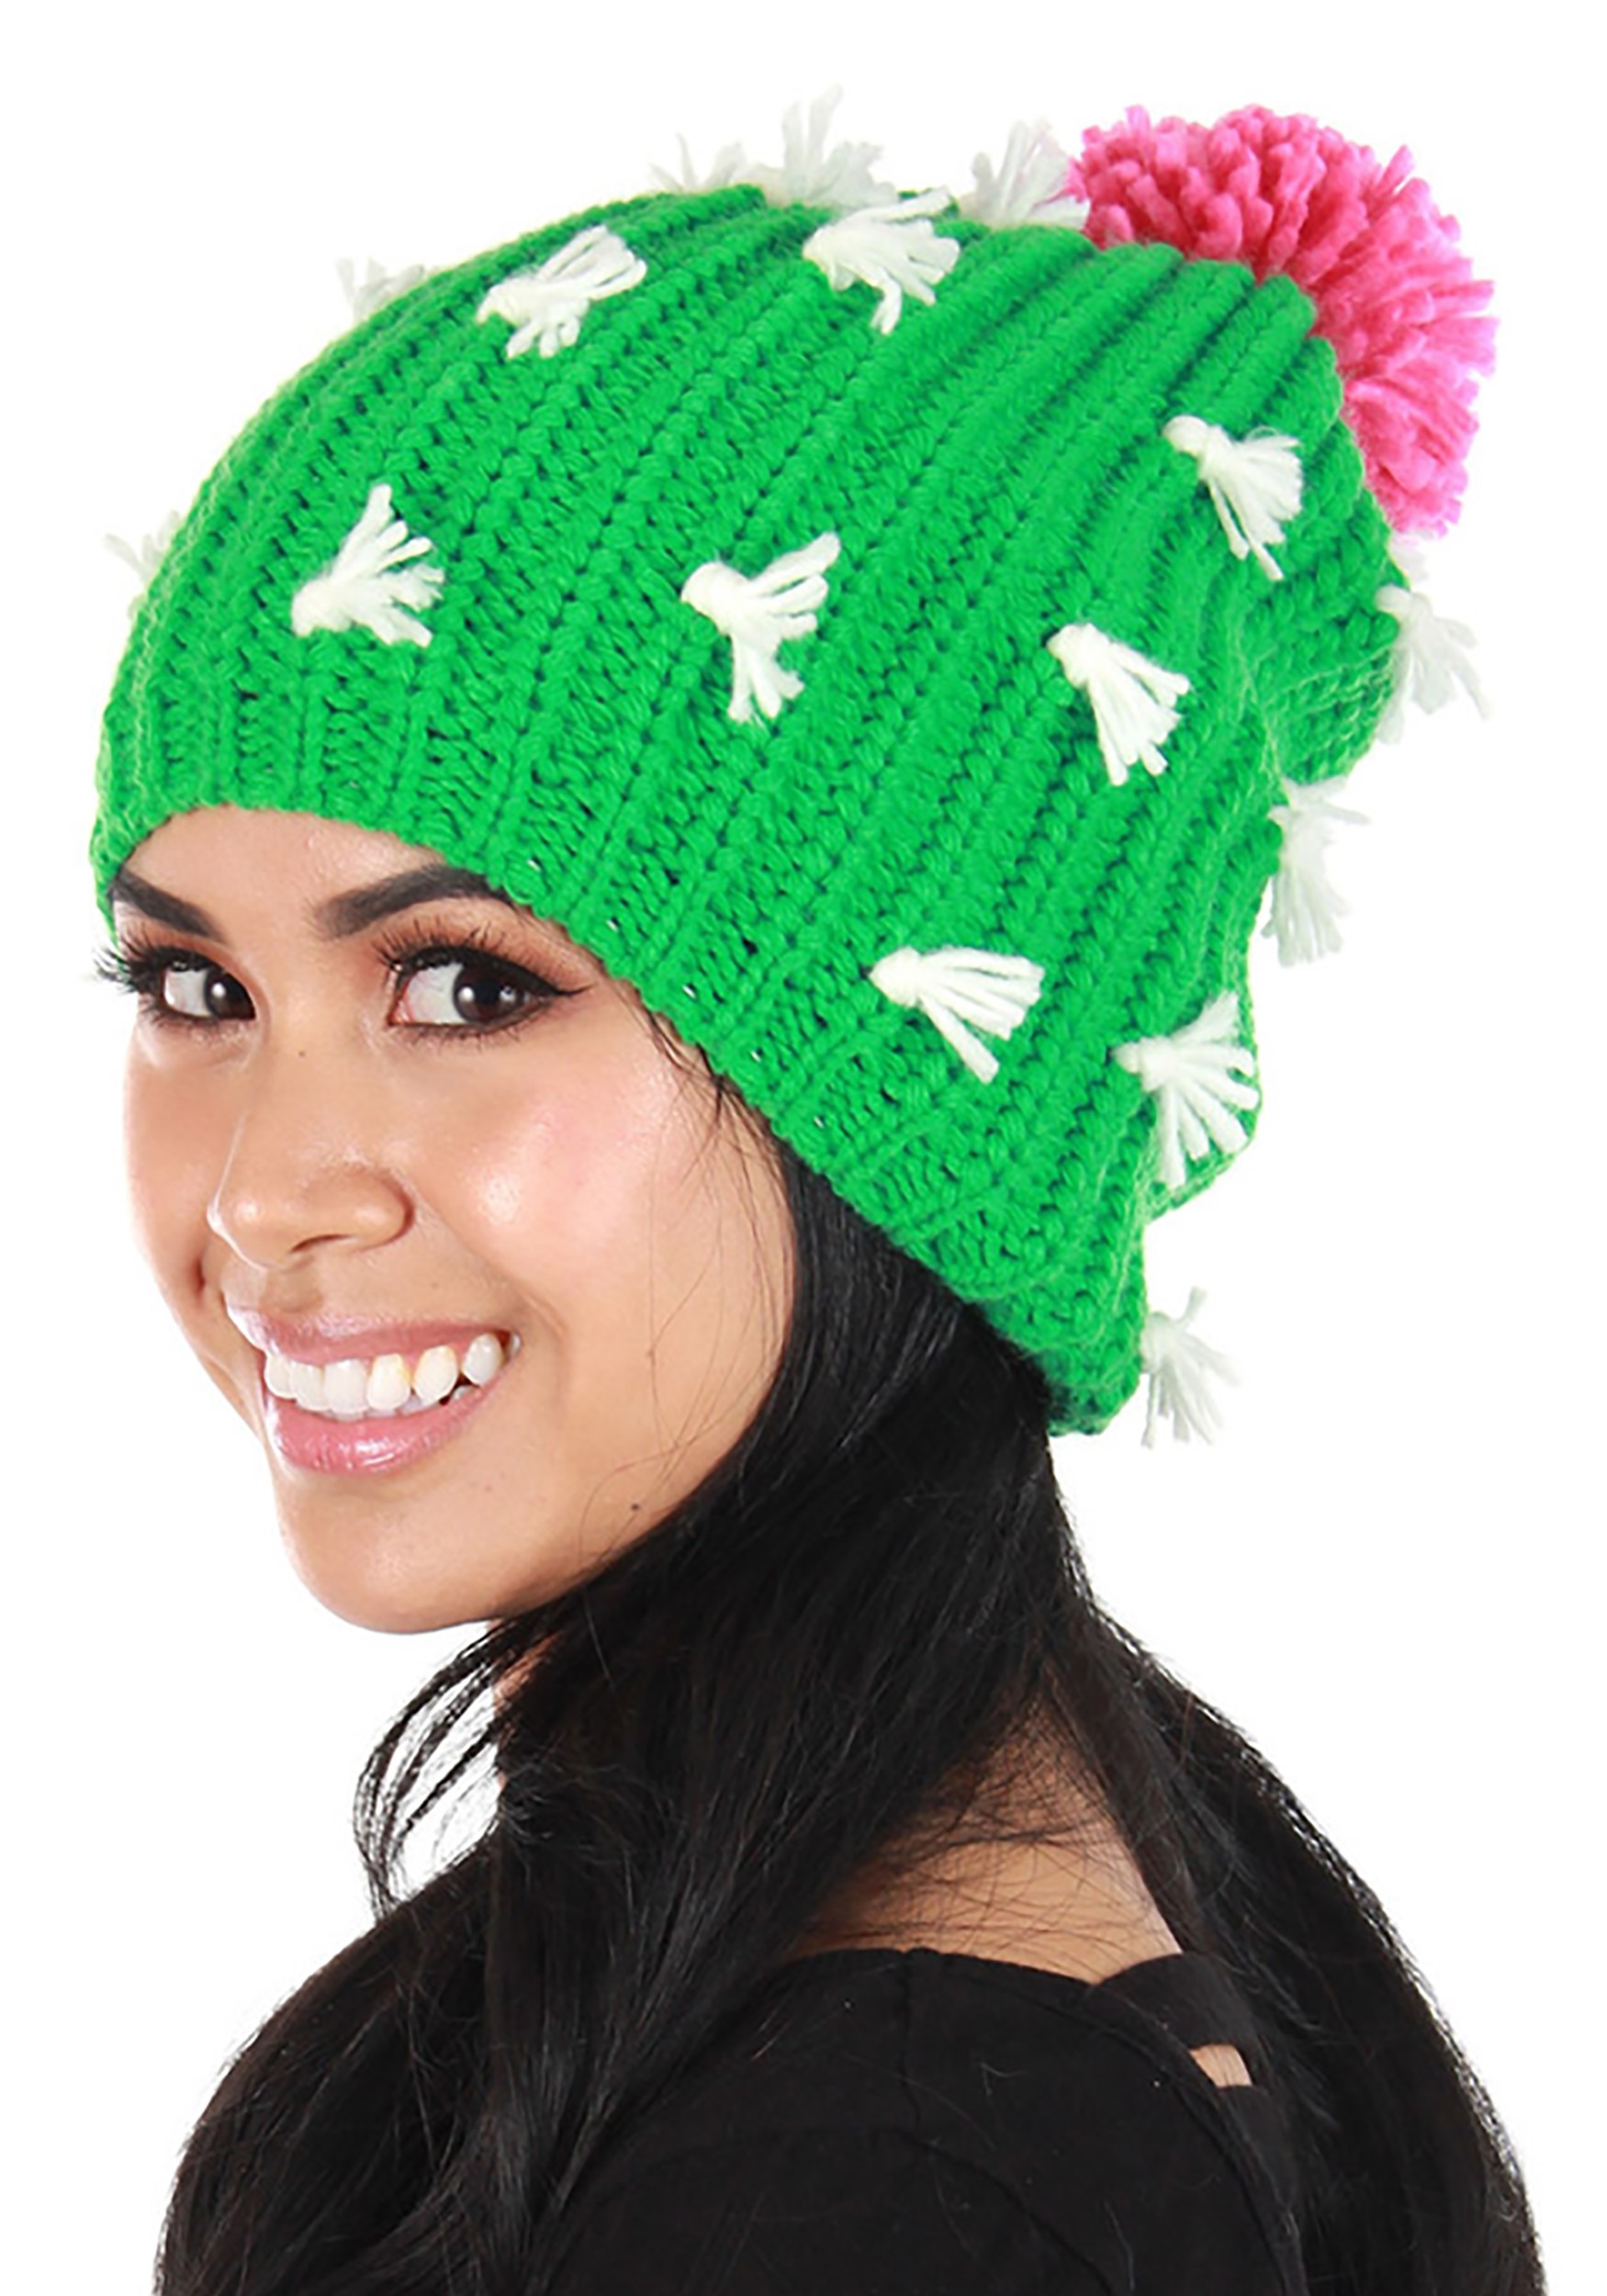 Adult Knit Cactus Slouch Beanie , Knitted Adult Hat